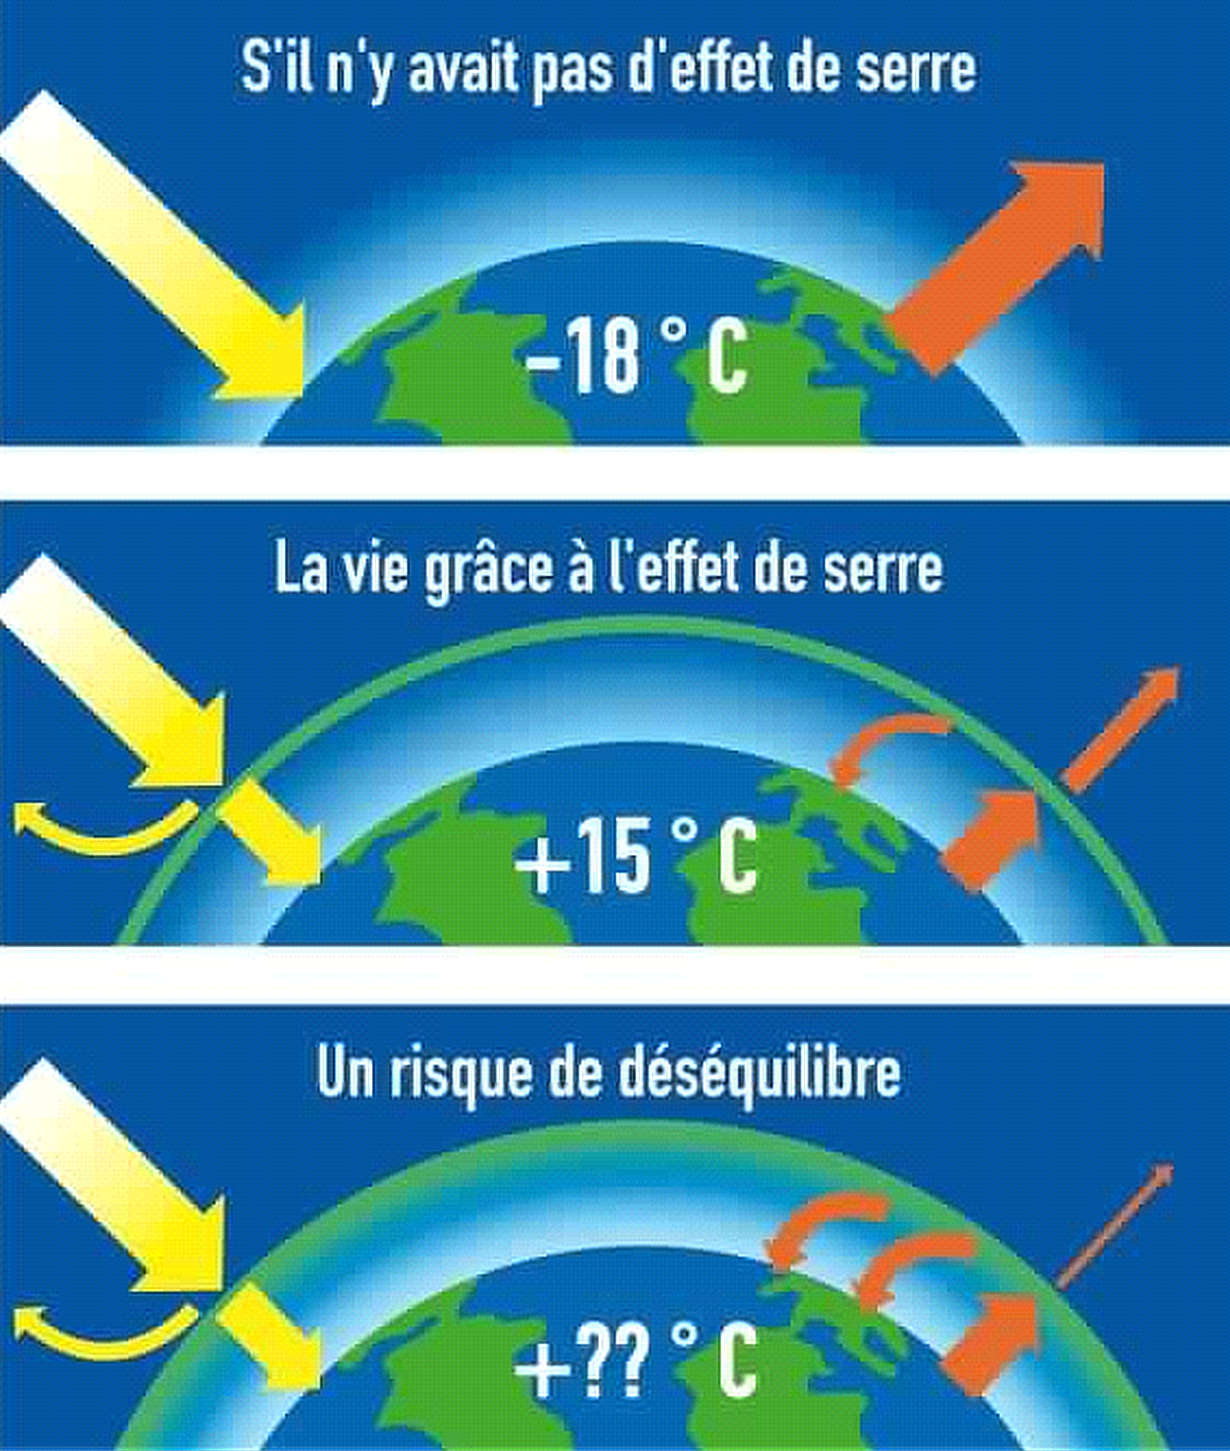 Explanation of the greenhouse effect. Credit Youmanity